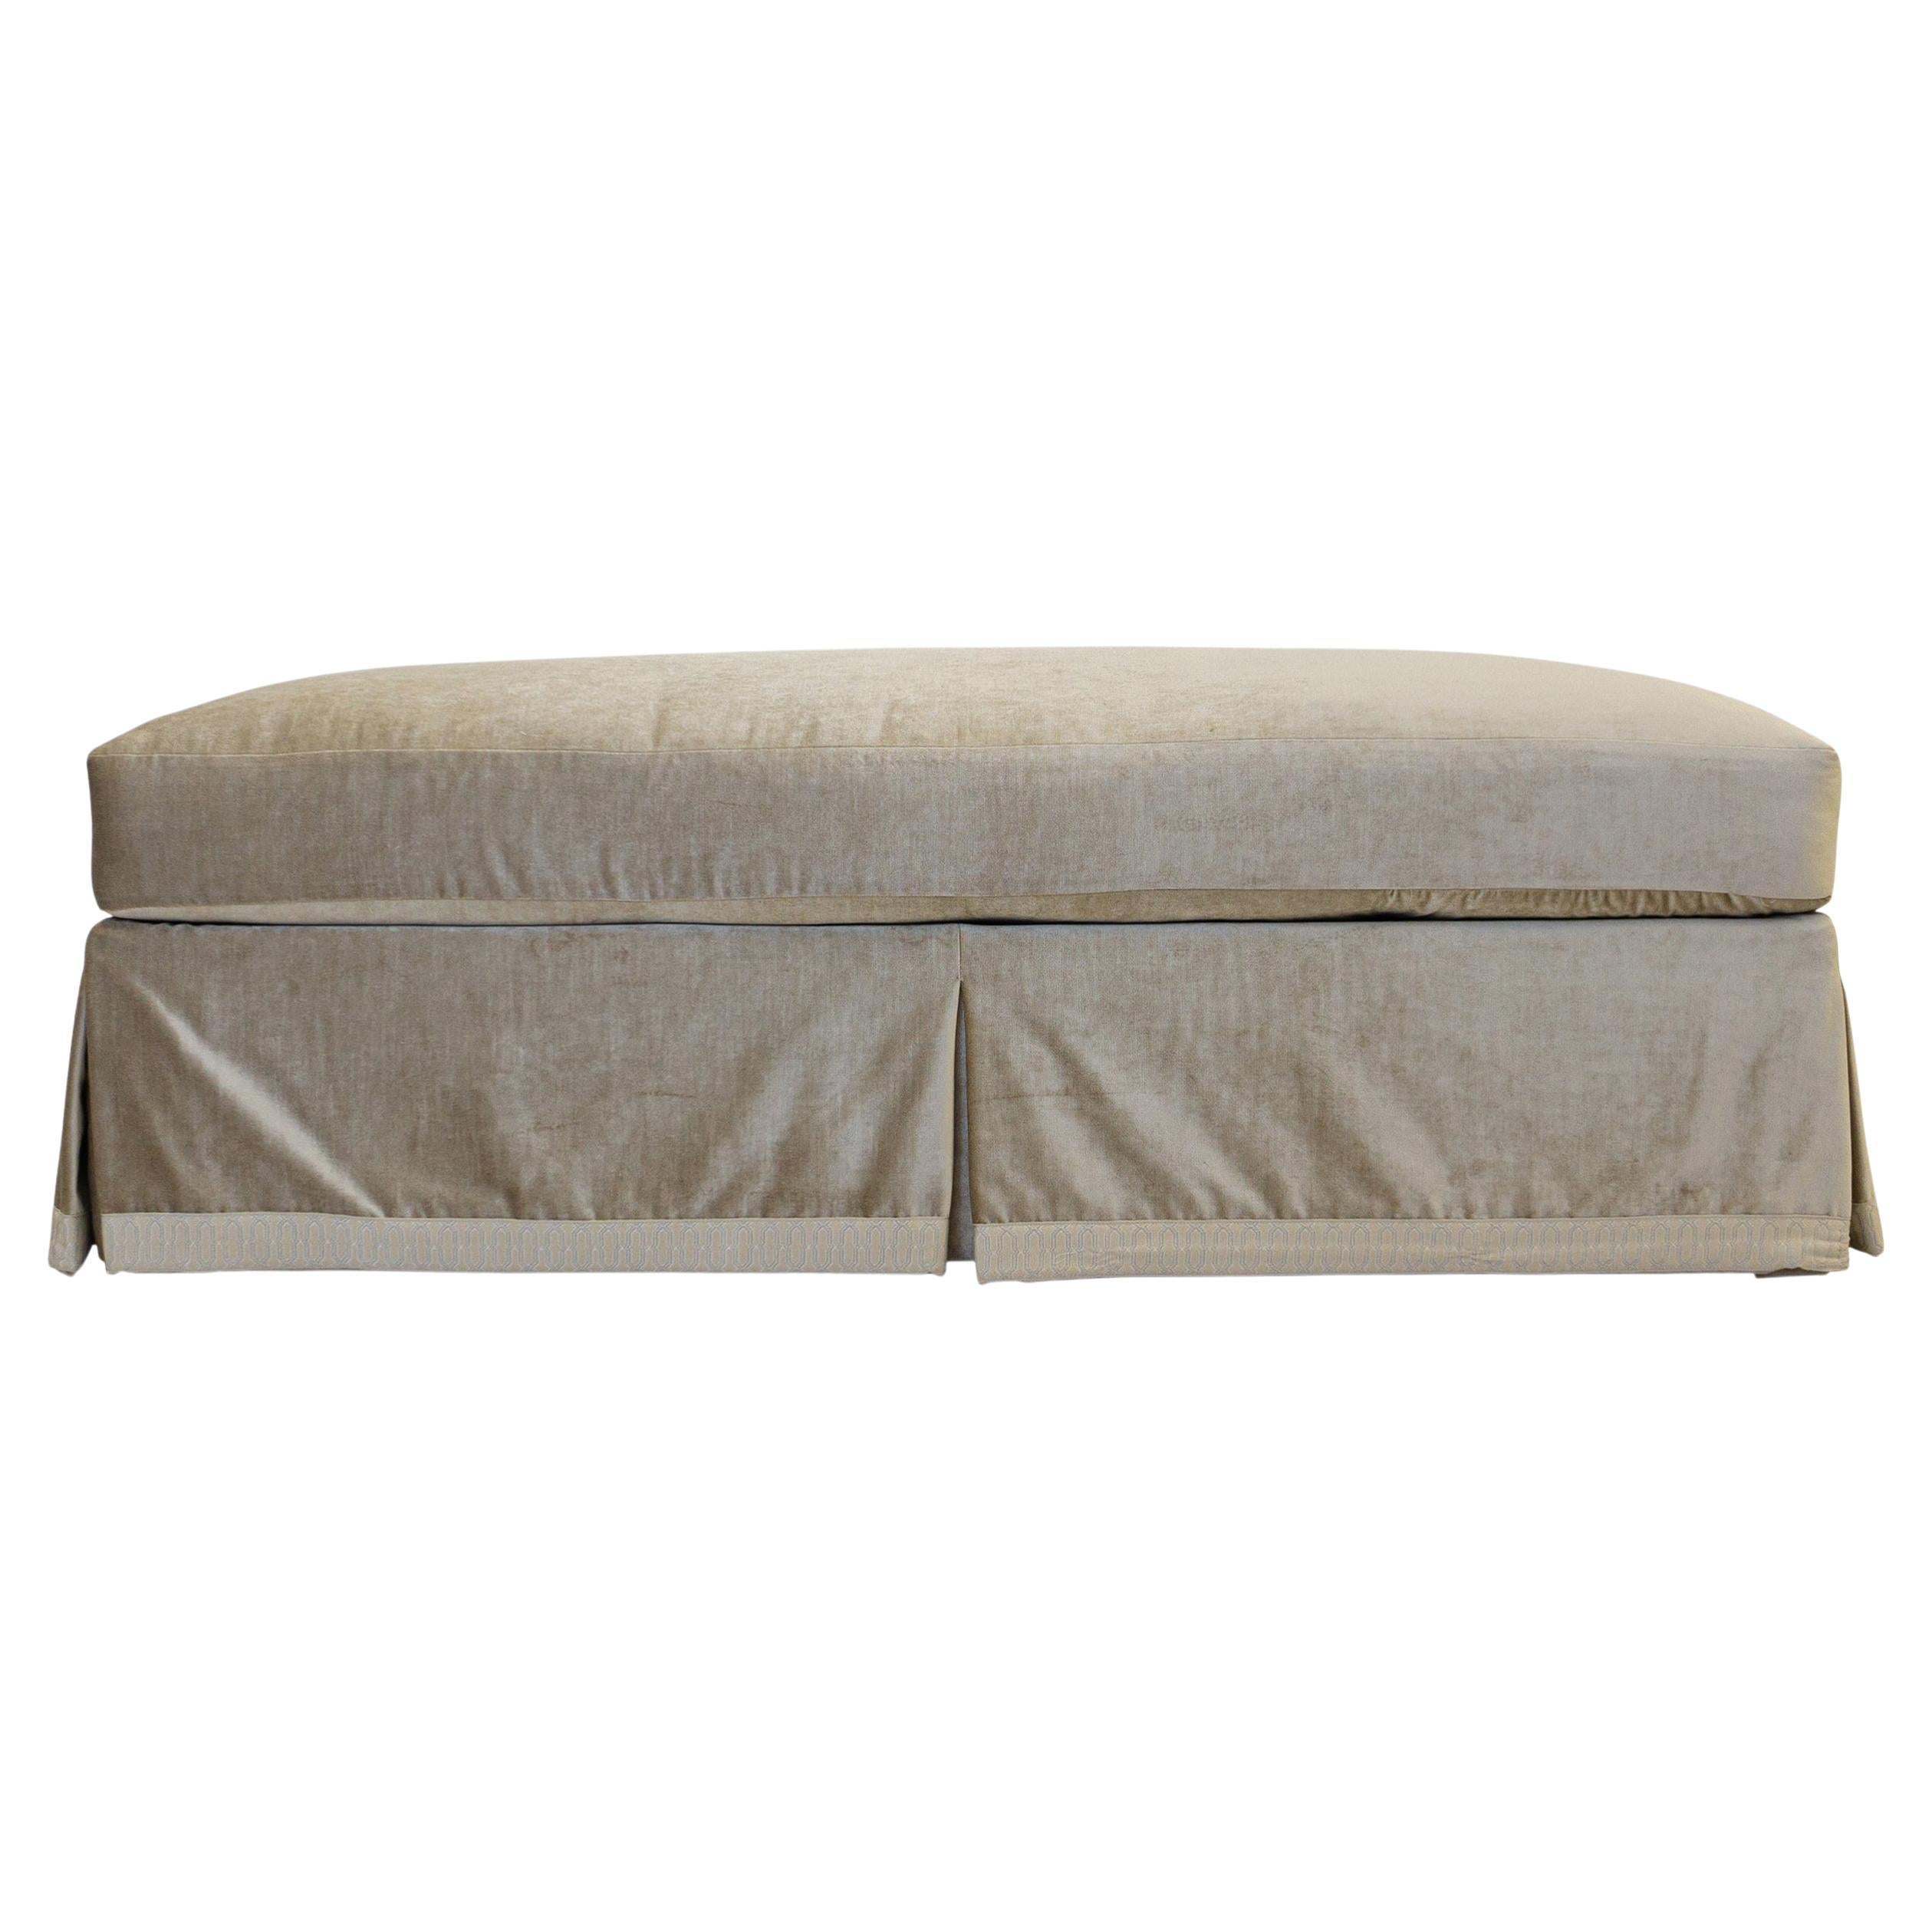 This piece is currently only available as a custom made piece. The price shown DOES NOT include fabric.

Elegant skirted ottoman with loose cushion and tape detail. Fully customizable and requires 8 yards fabric plus trim if used. Ask us about